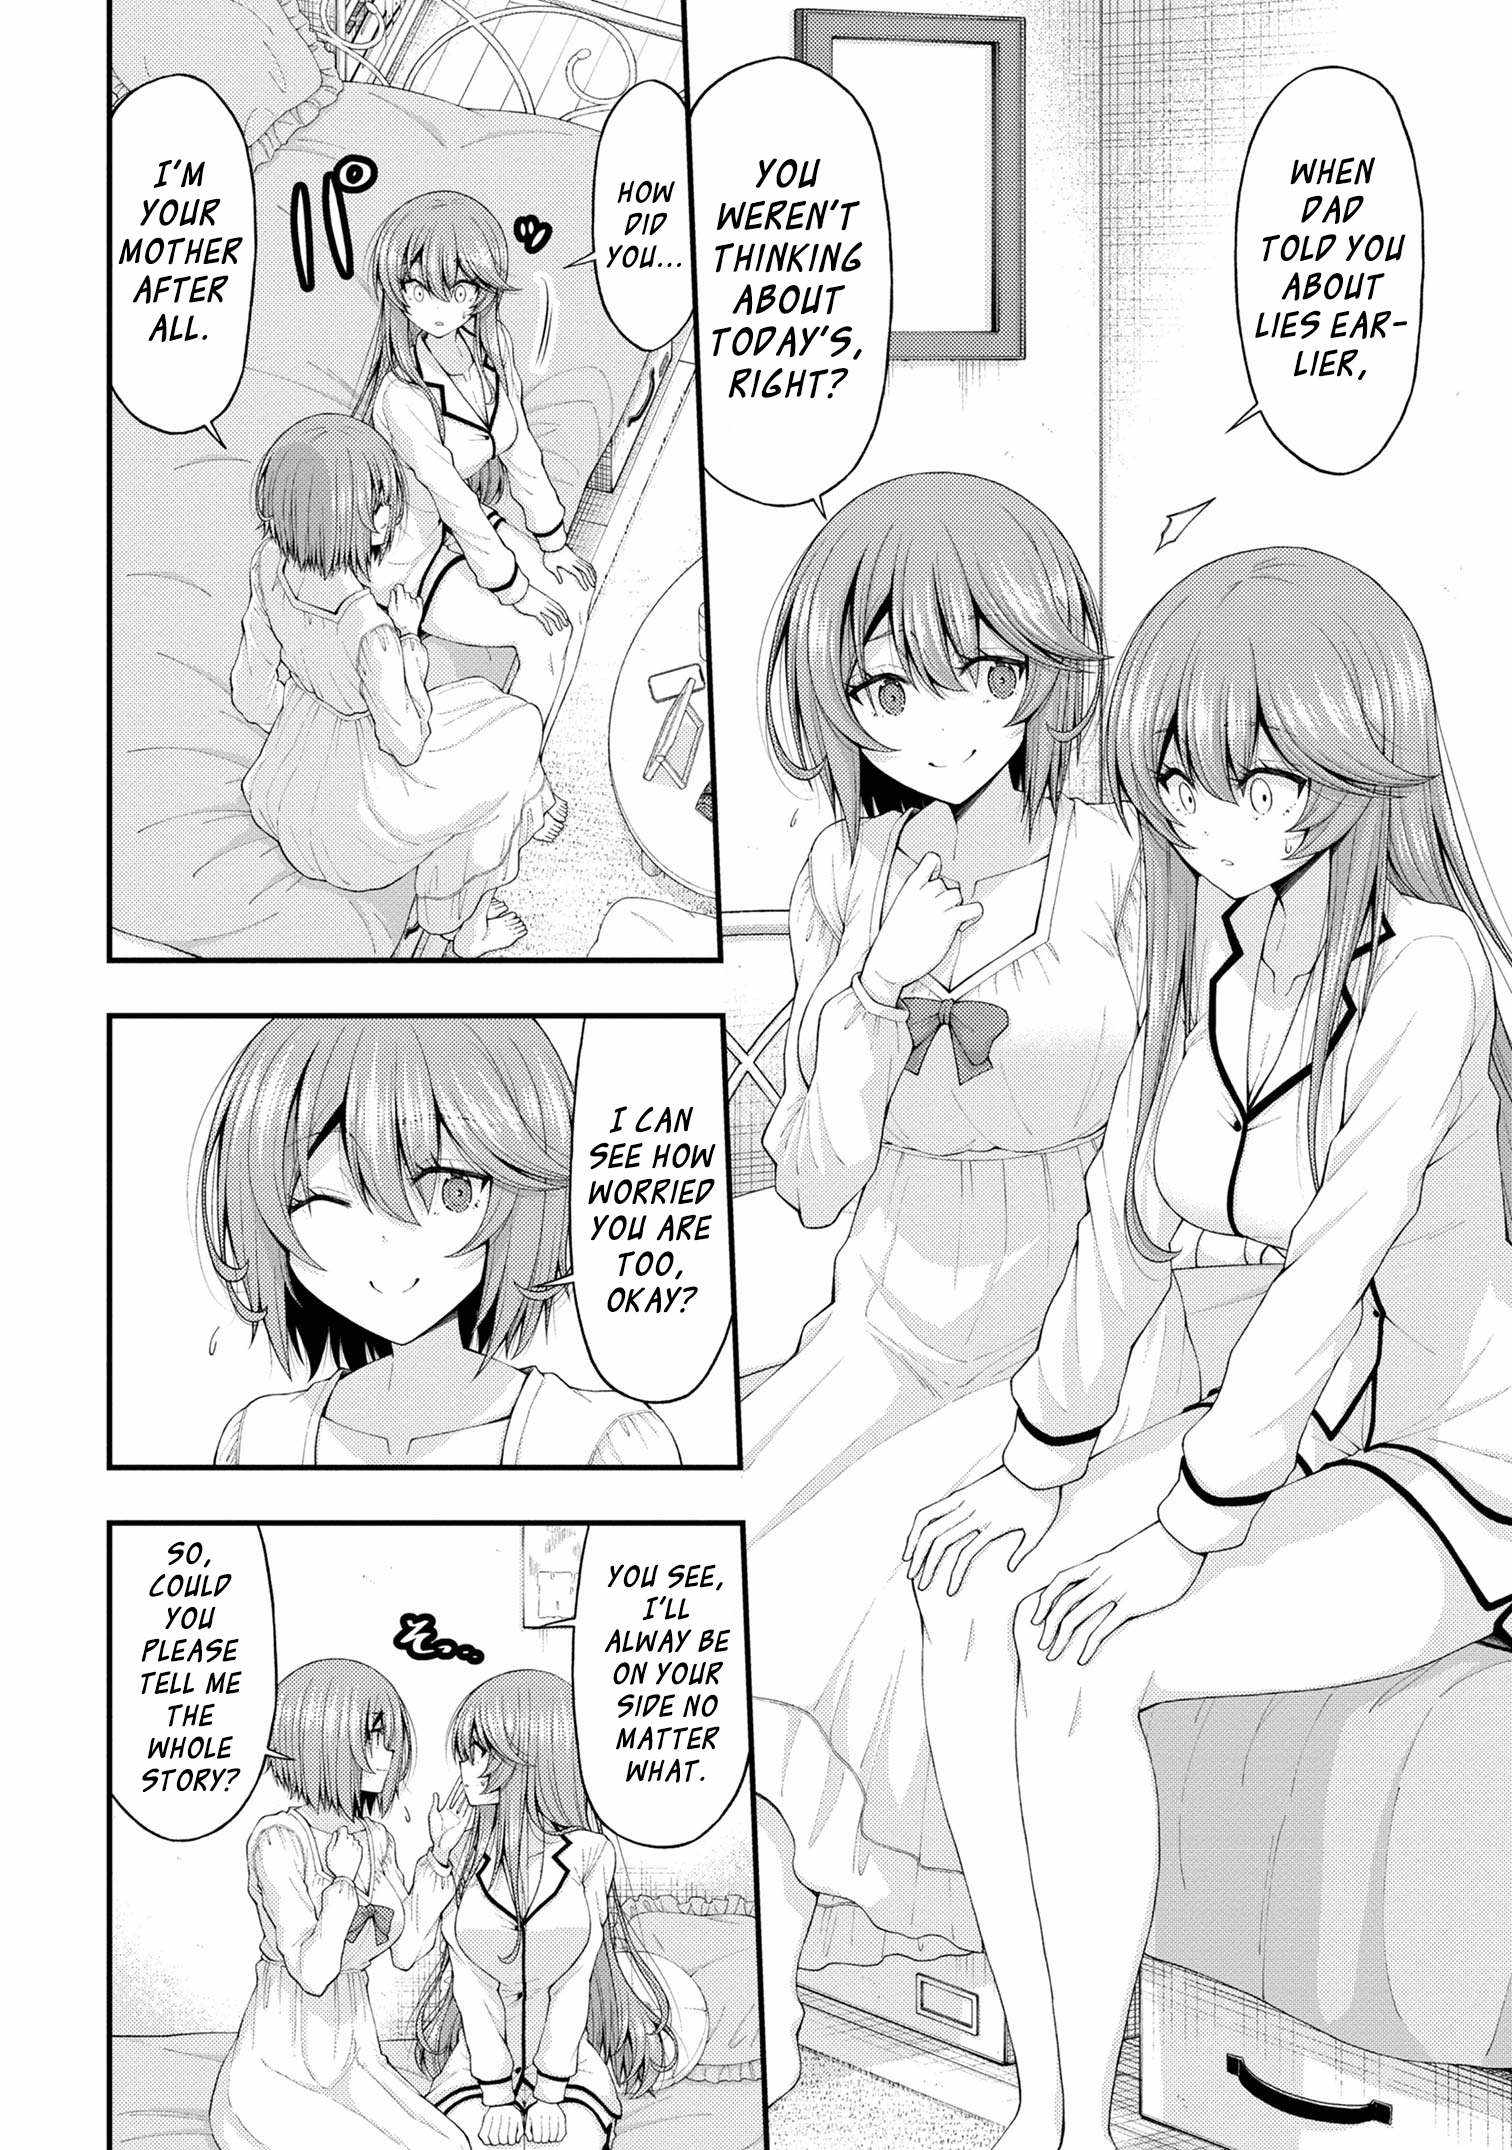 The Gal Who Was Meant to Confess to Me as a Game Punishment Has Apparently Fallen in Love with Me Chapter 12-5-eng-li - Page 15